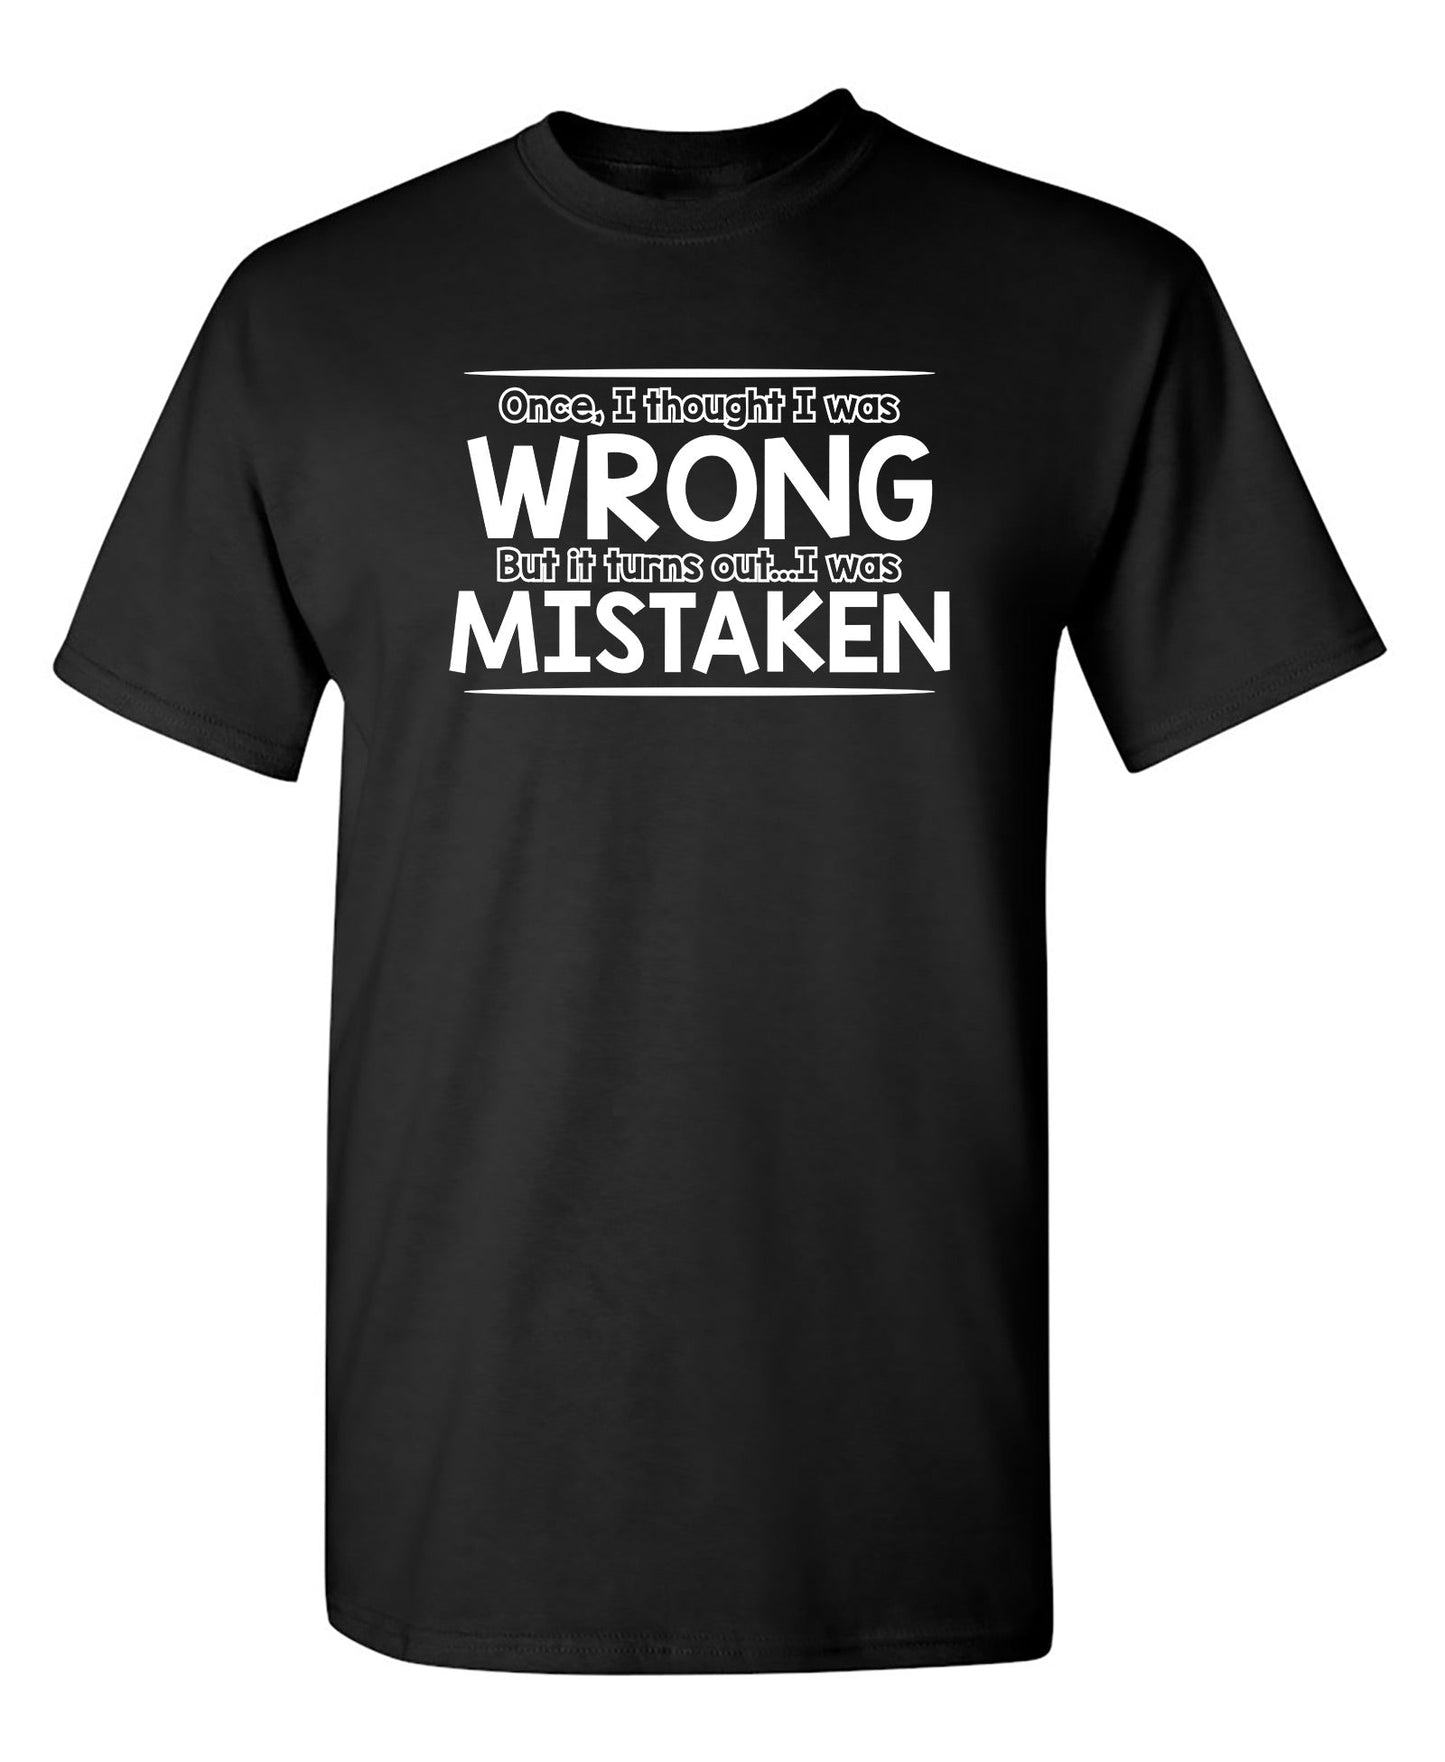 I Thought I Was Wrong But It Turns Out I Was Mistaken - Funny T Shirts & Graphic Tees